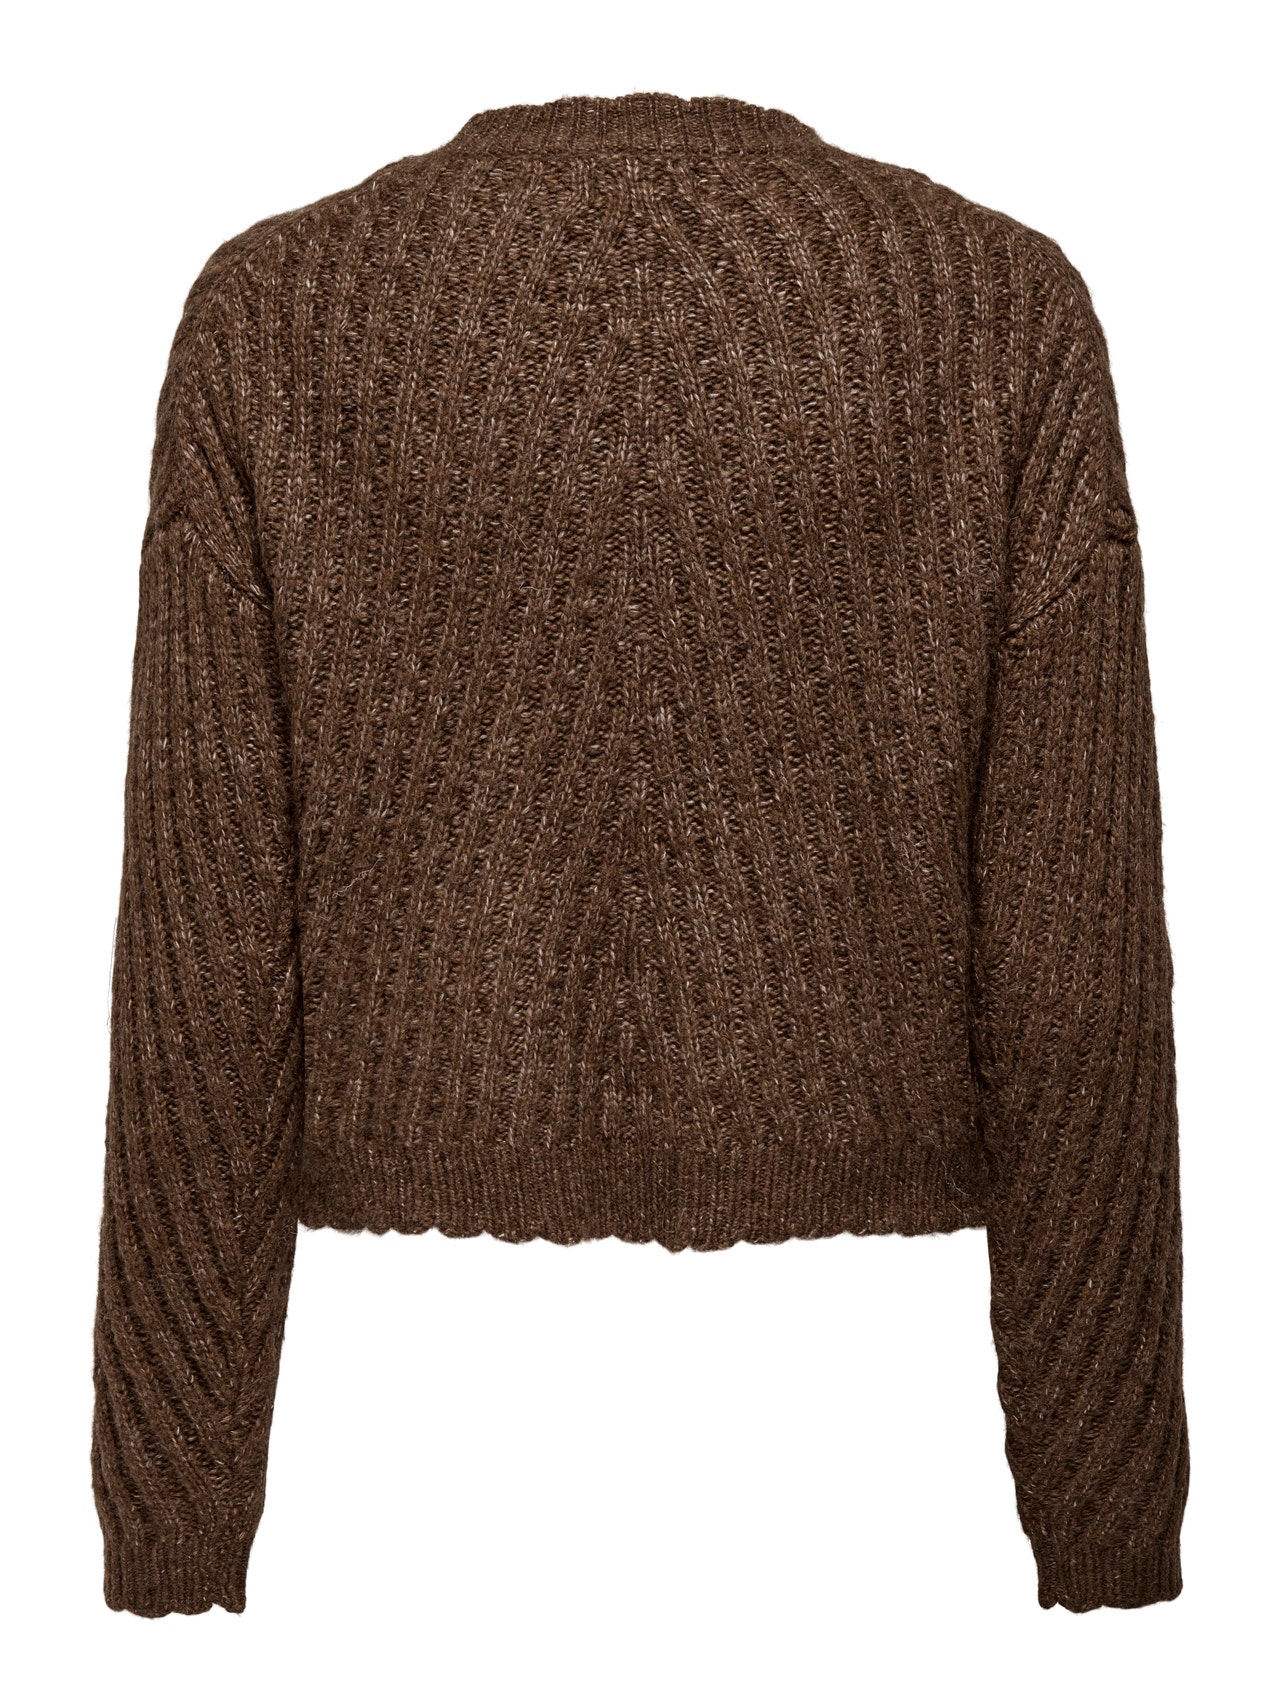 ONLY O-neck knitted pullover -Potting Soil - 15269070